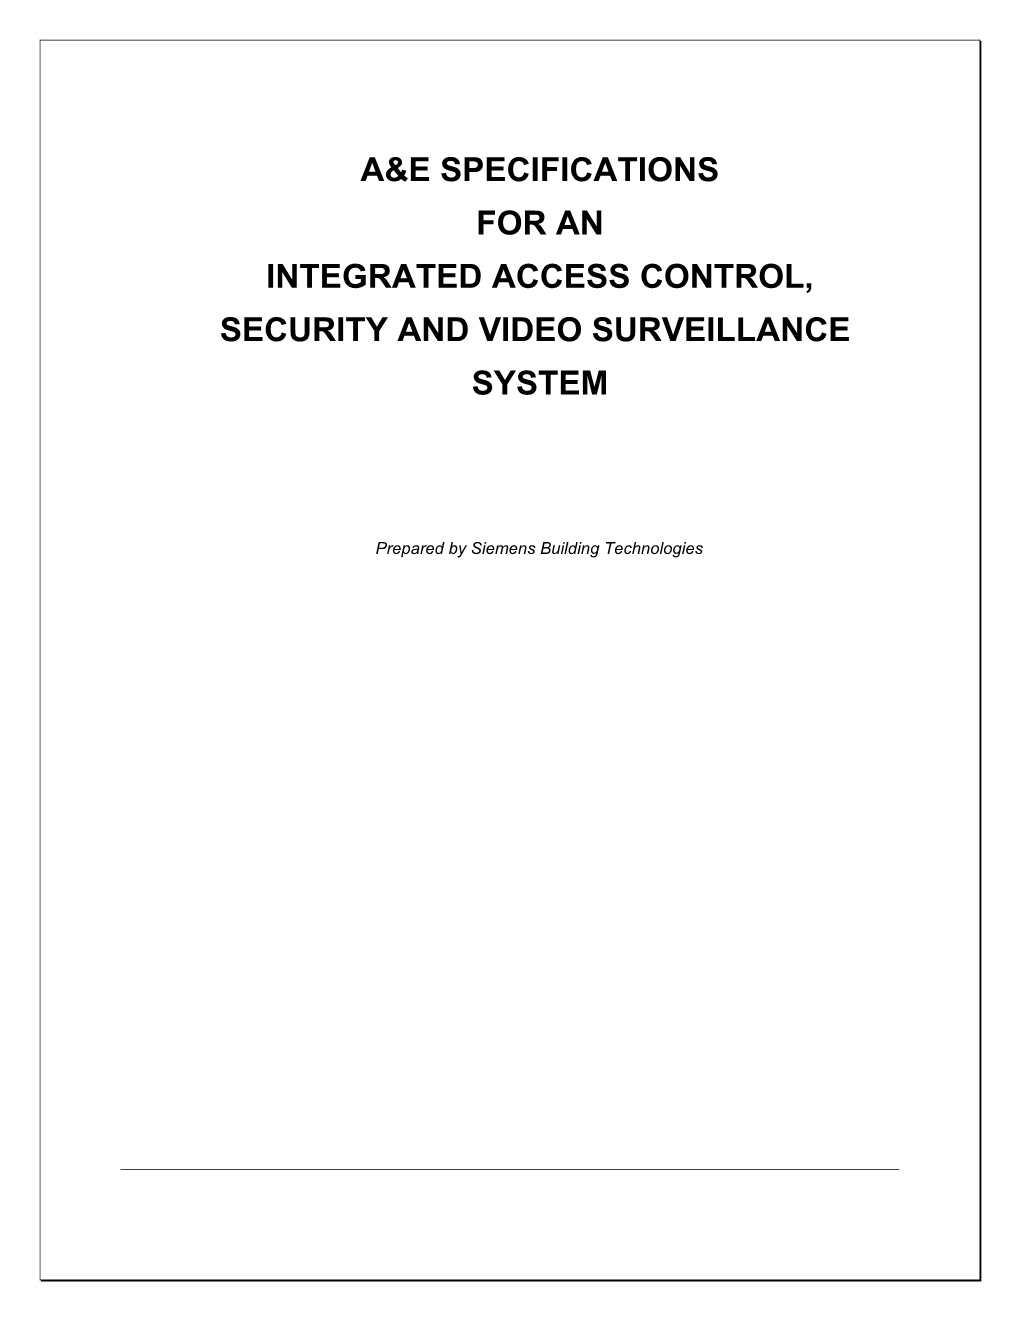 Security and Video Surveillance